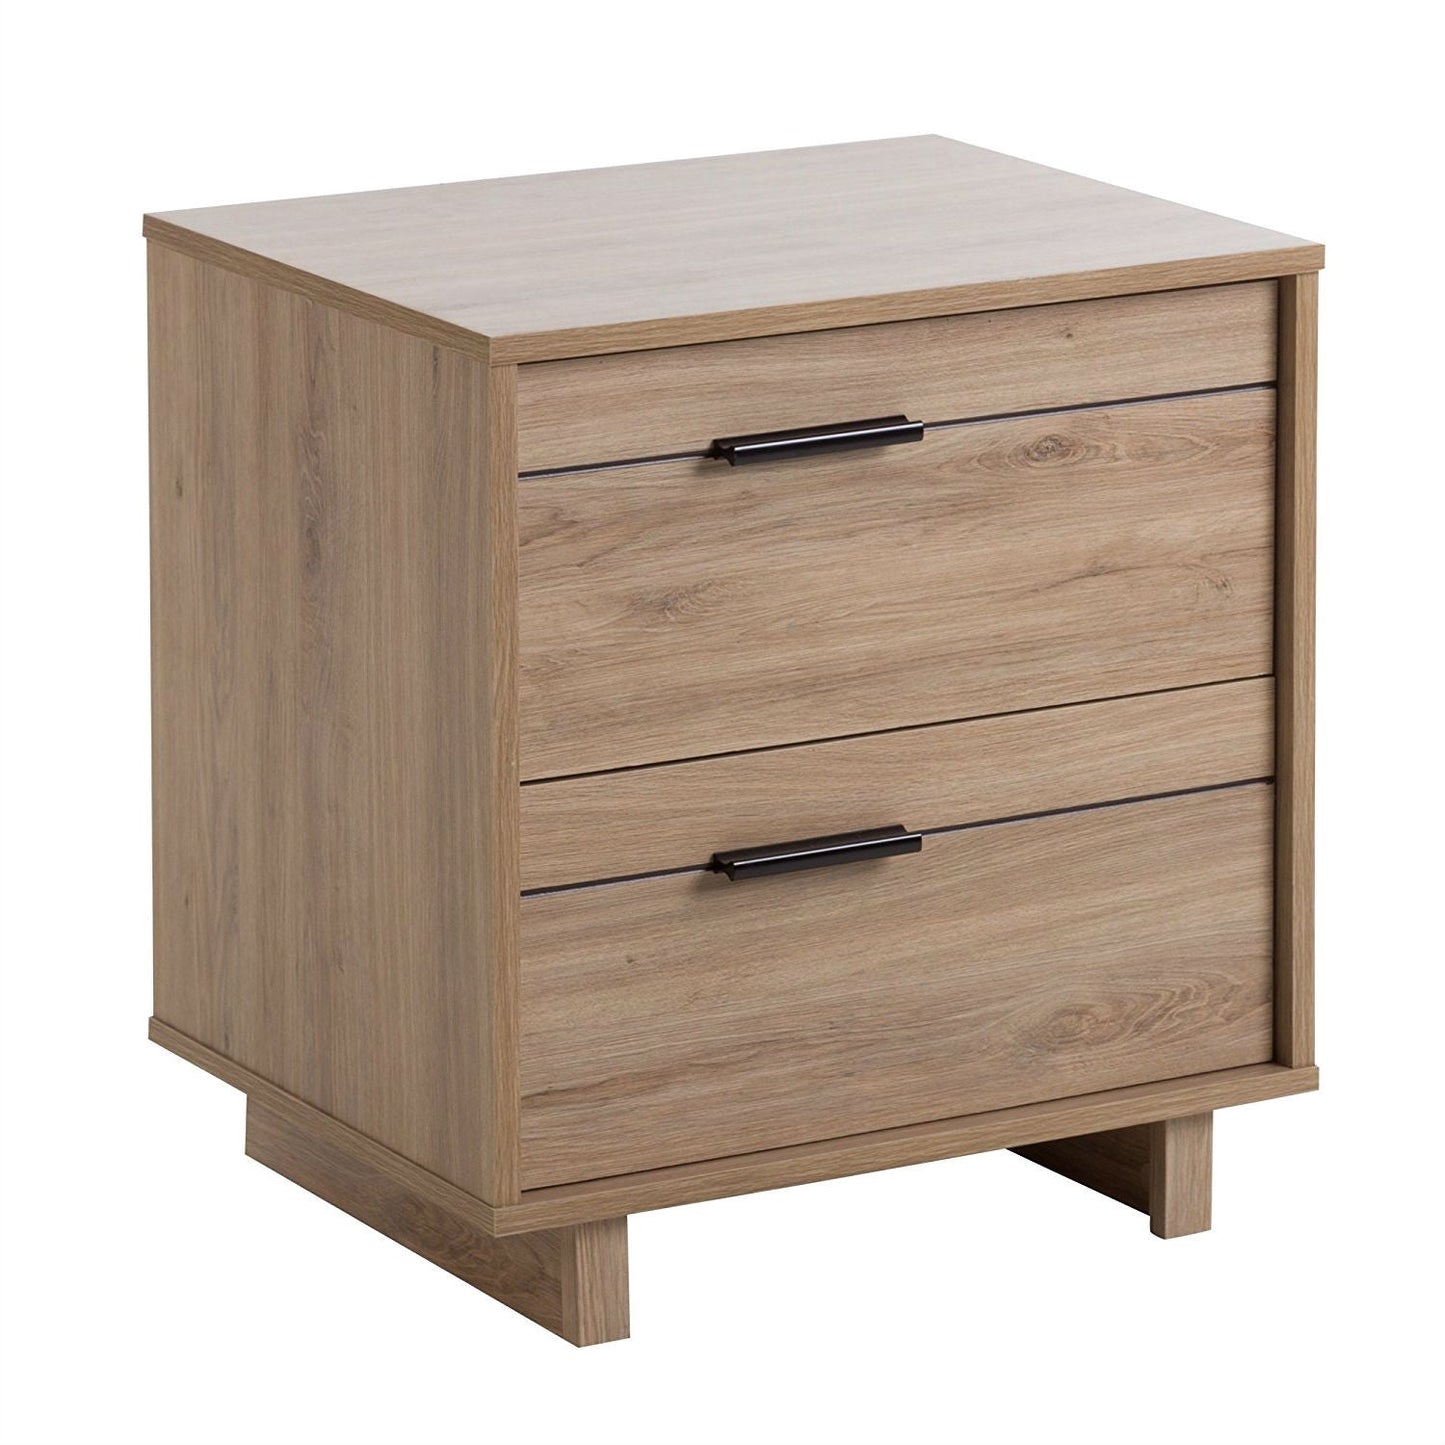 Bedroom > Nightstand And Dressers - Modern 2-Drawer End Table Nightstand In Light Oak Wood Finish